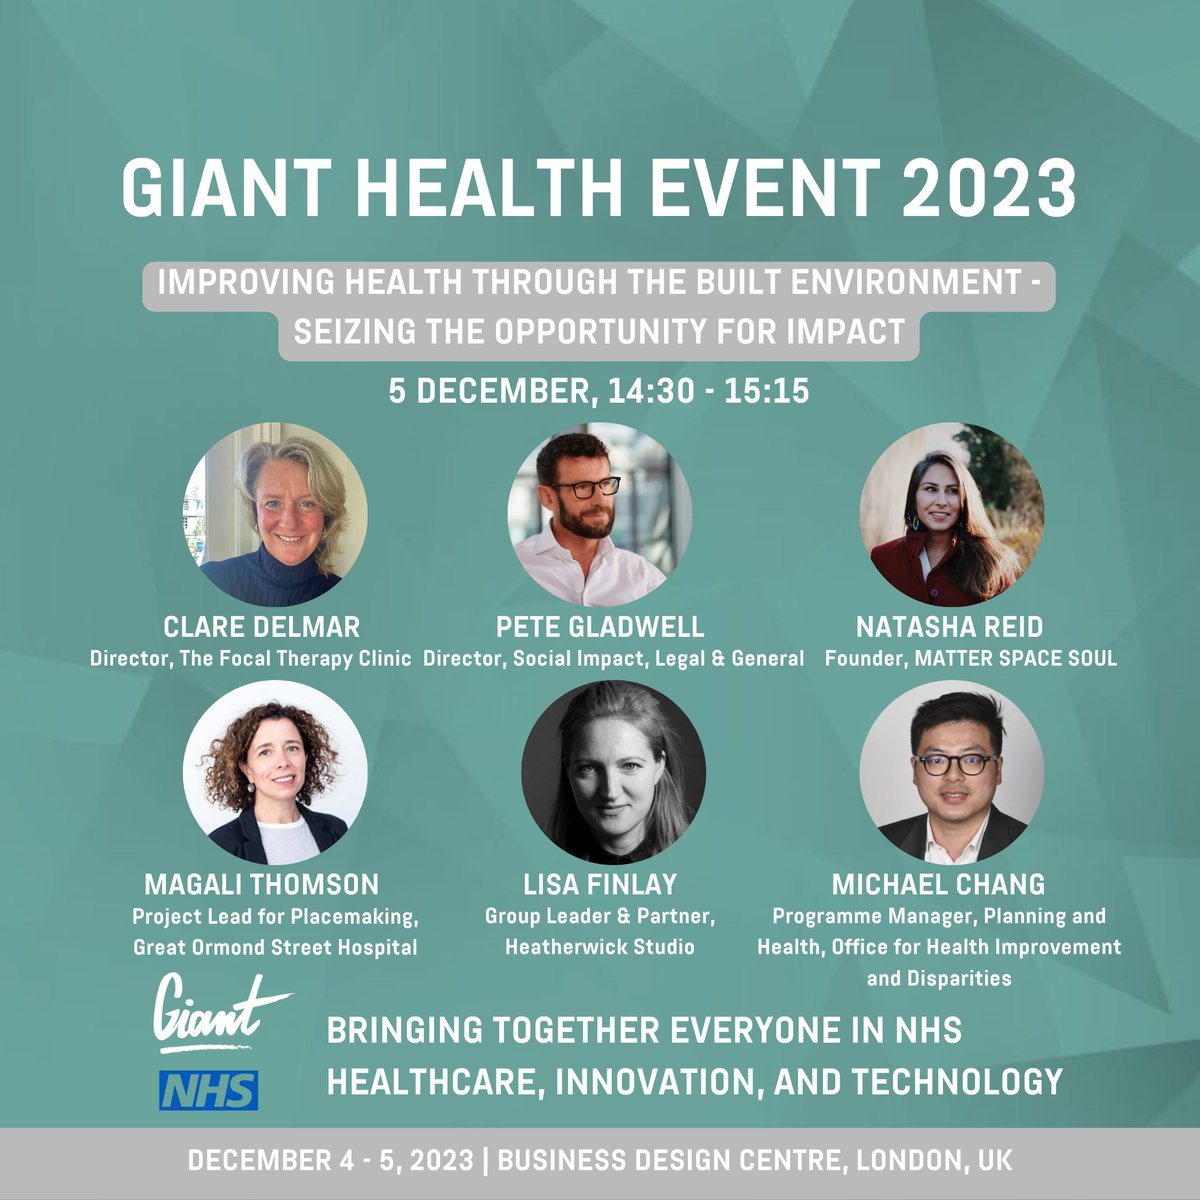 🗣️Join us at #NHS National ICS Congress at #GIANT2023 and learn about Improving #Health through the Built Environment - Seizing the opportunity for impact 🌟@ClareDelmar 🌟@MichaelCJChang 🌟@PeteGladwell 🌟@Magalitt 🌟@tashReid 🌟Lisa Finlay, Heatherwick 🎫giant.health/tickets